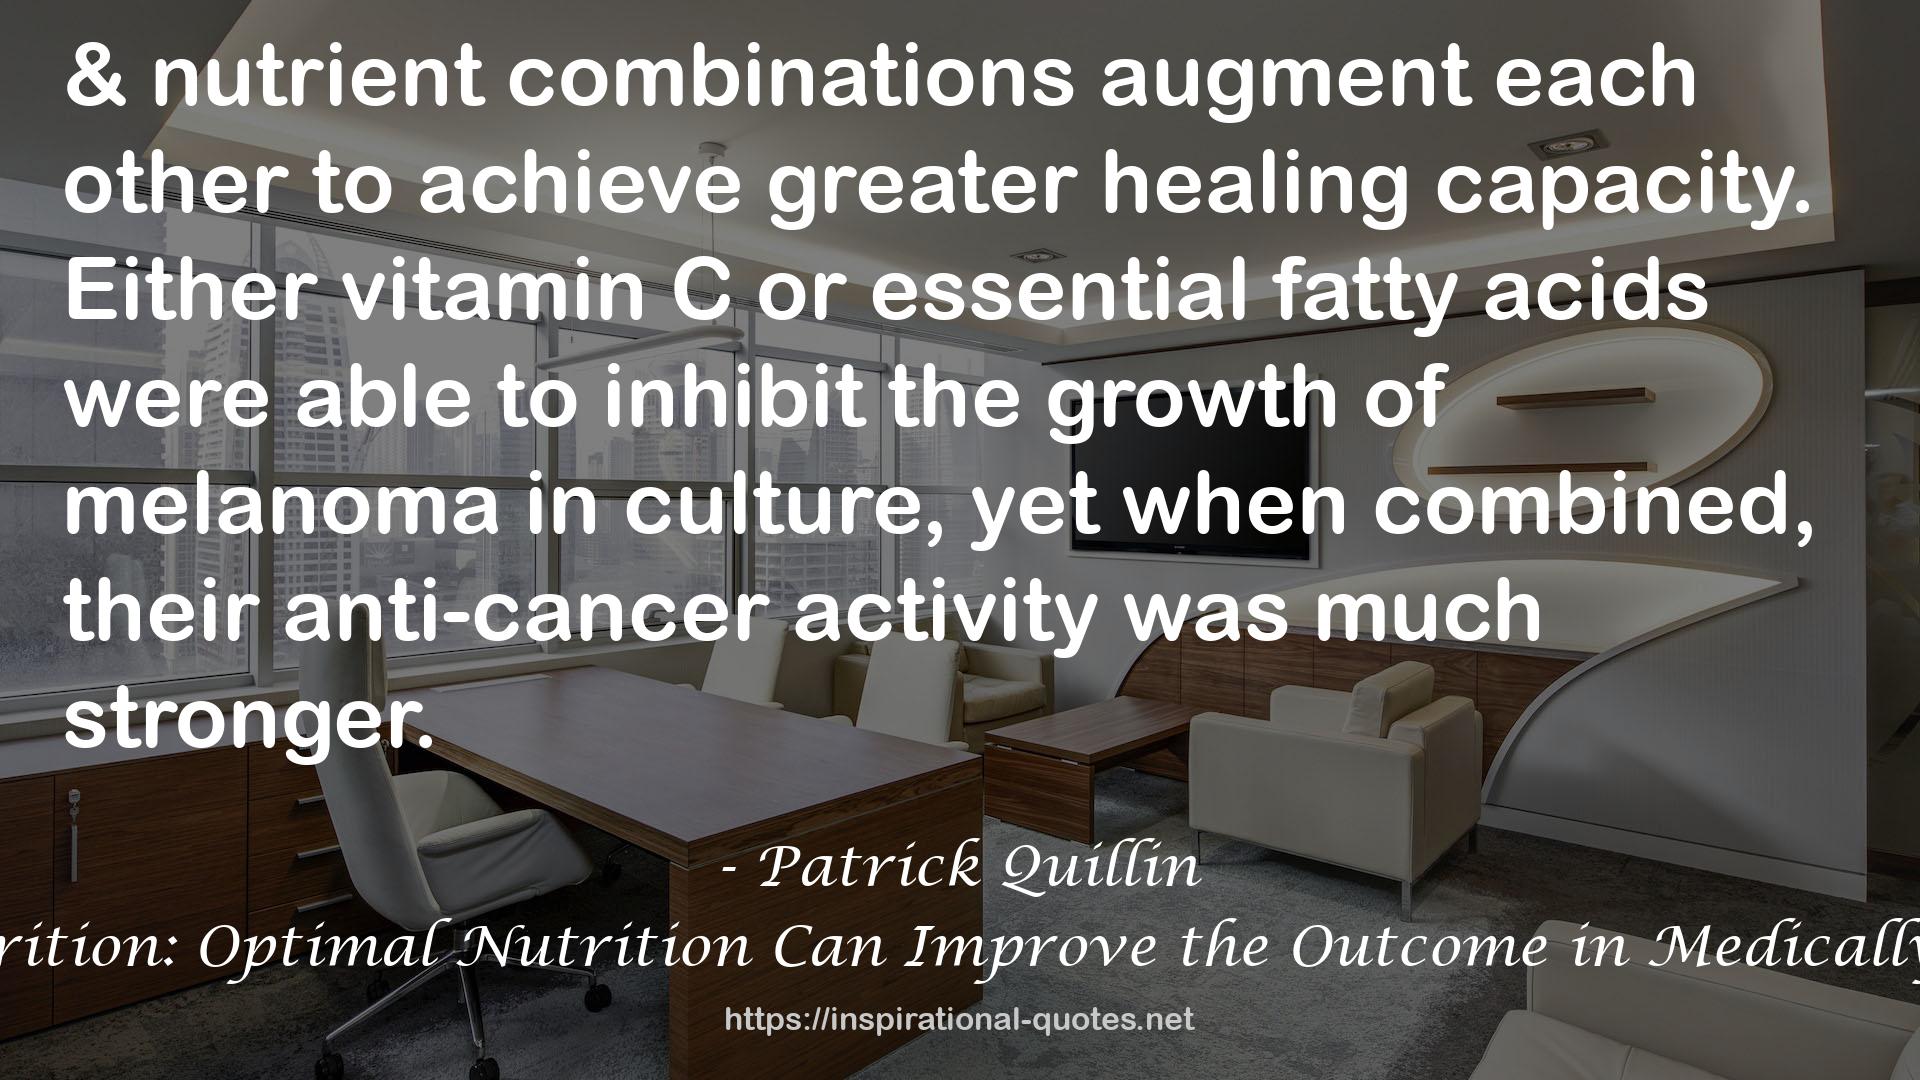 Beating Cancer with Nutrition: Optimal Nutrition Can Improve the Outcome in Medically-Treated Cancer Patients QUOTES